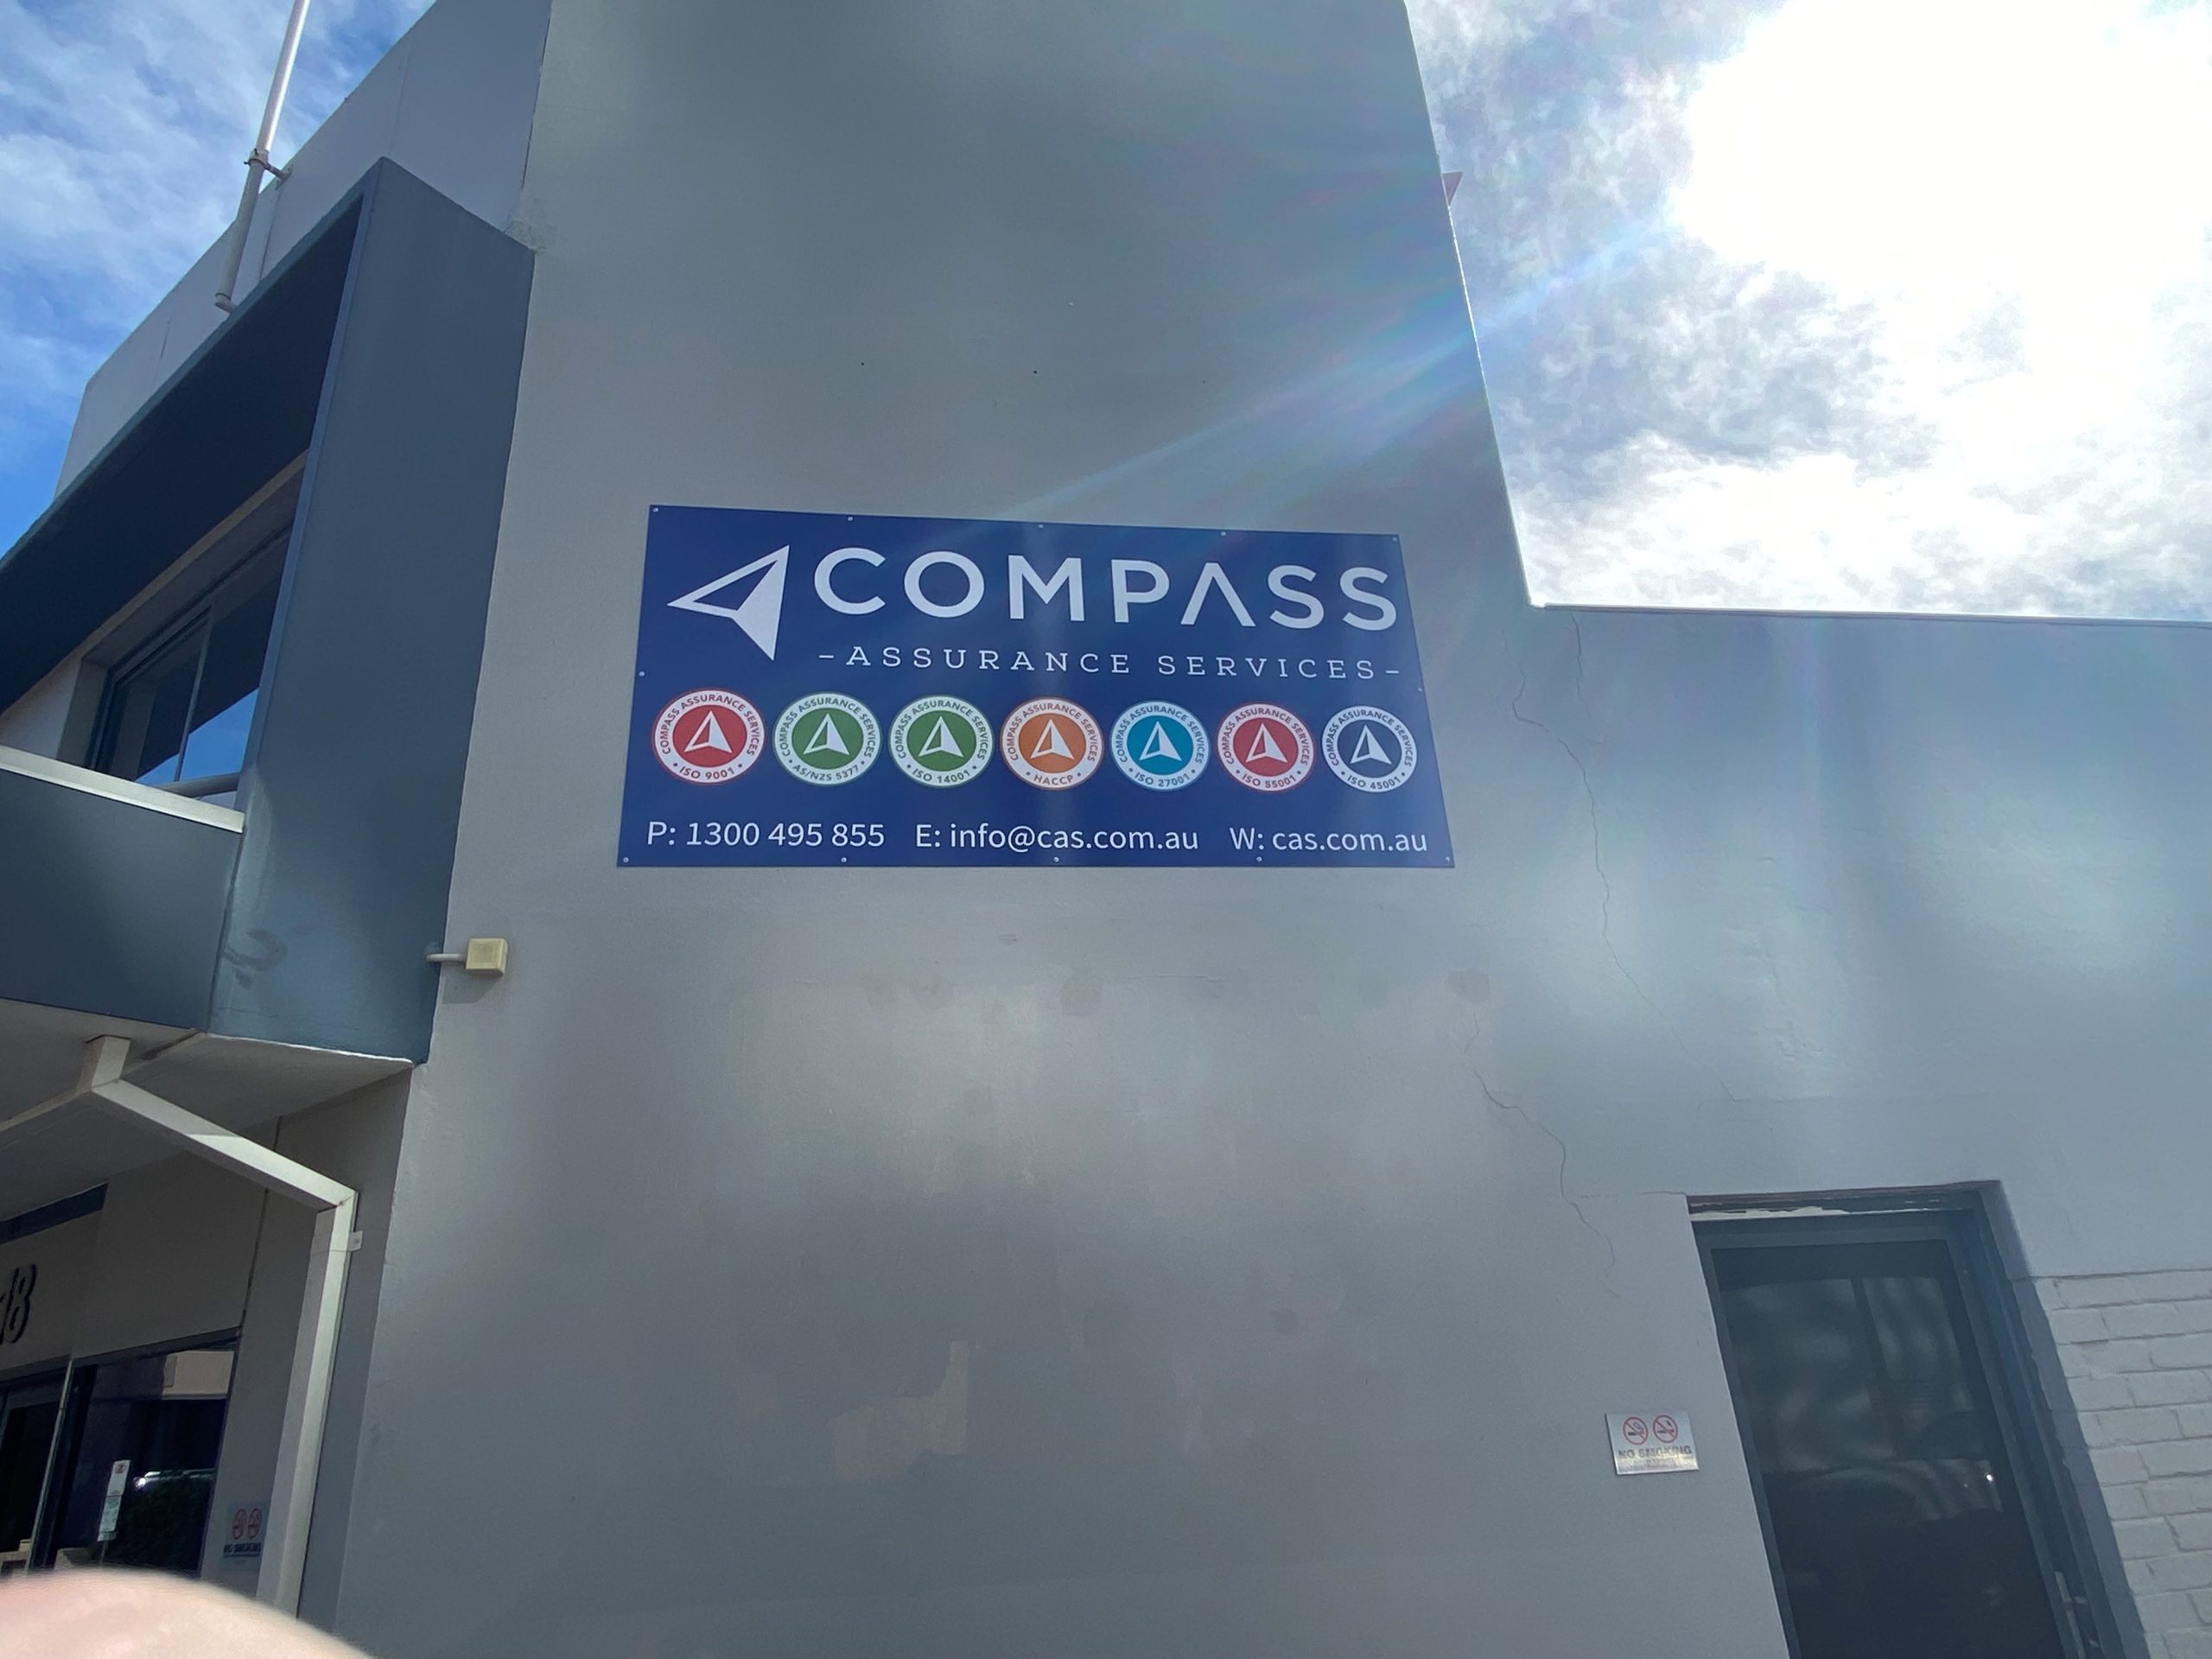 Compass Assurance Services office for 9001 certification in Perth